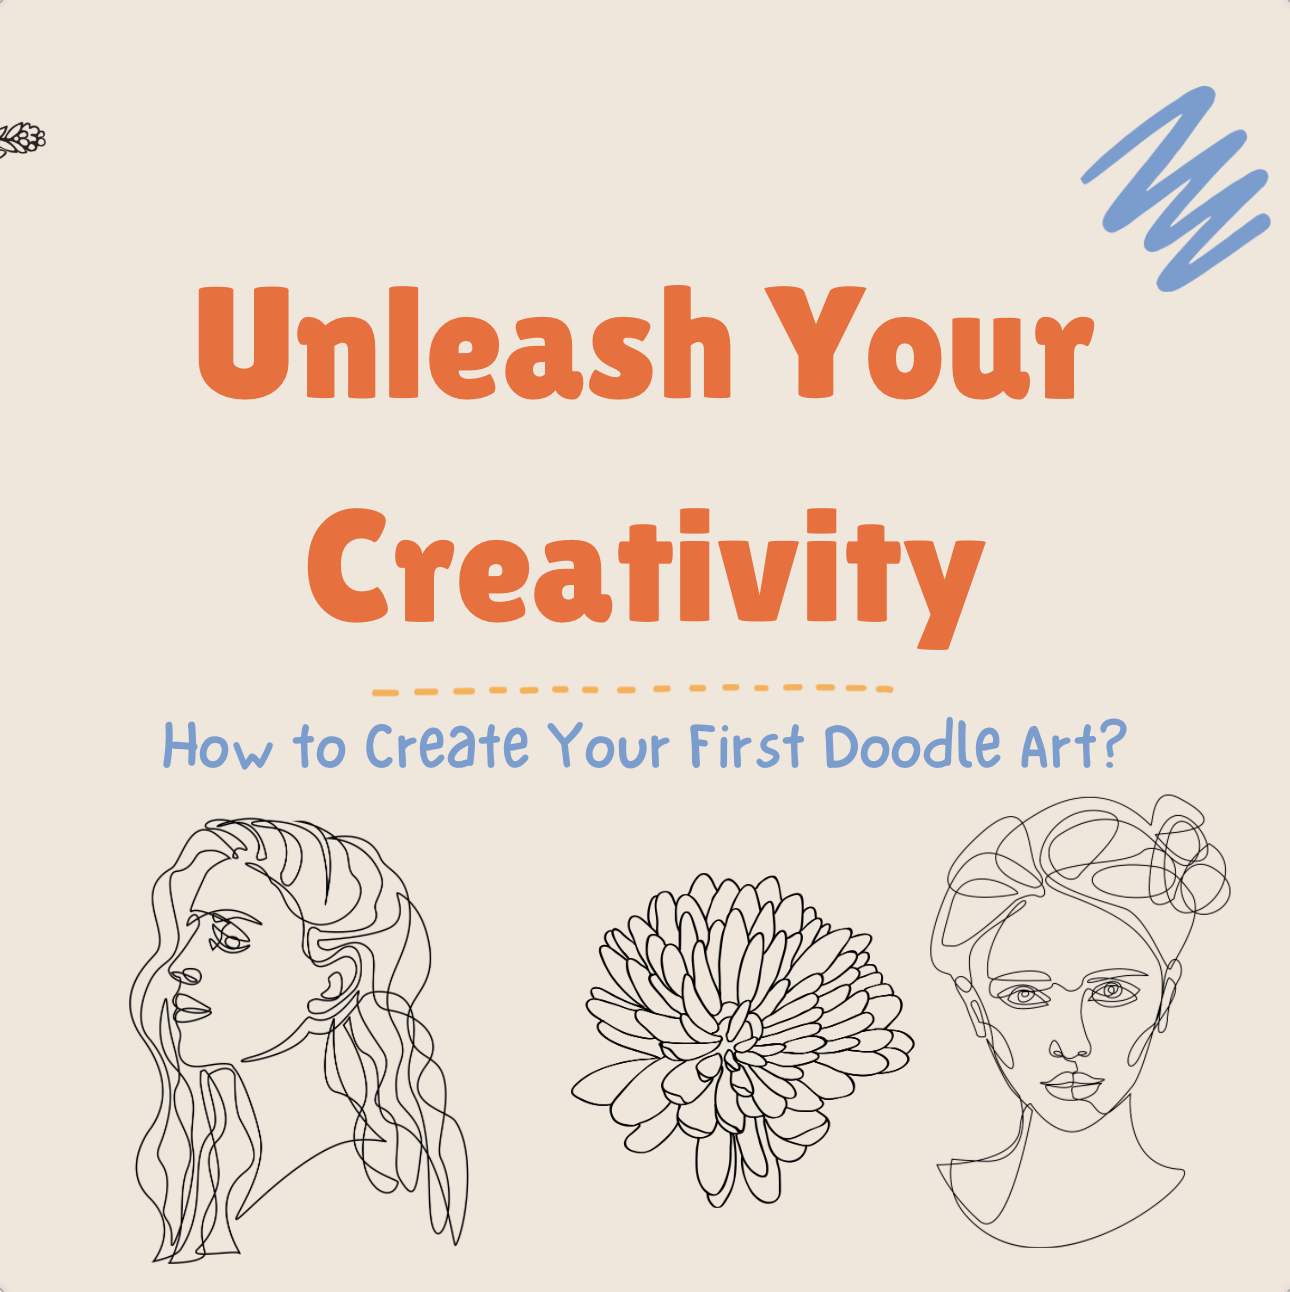 Unleash Your Creativity: How to Create Your First Doodle Art?